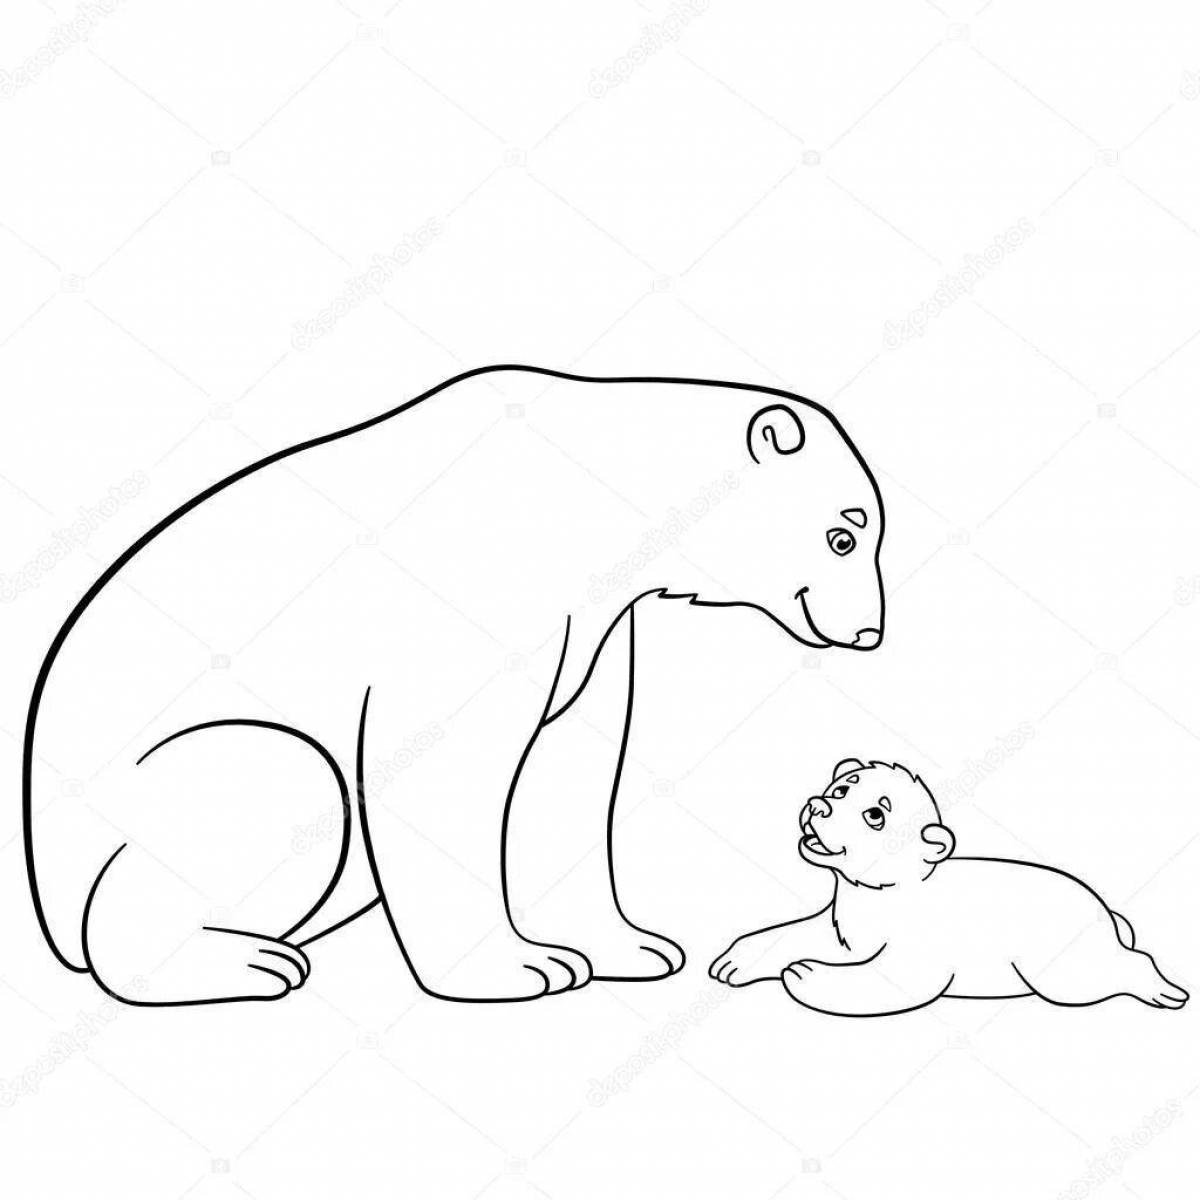 Coloring page adorable teddy bear with cubs